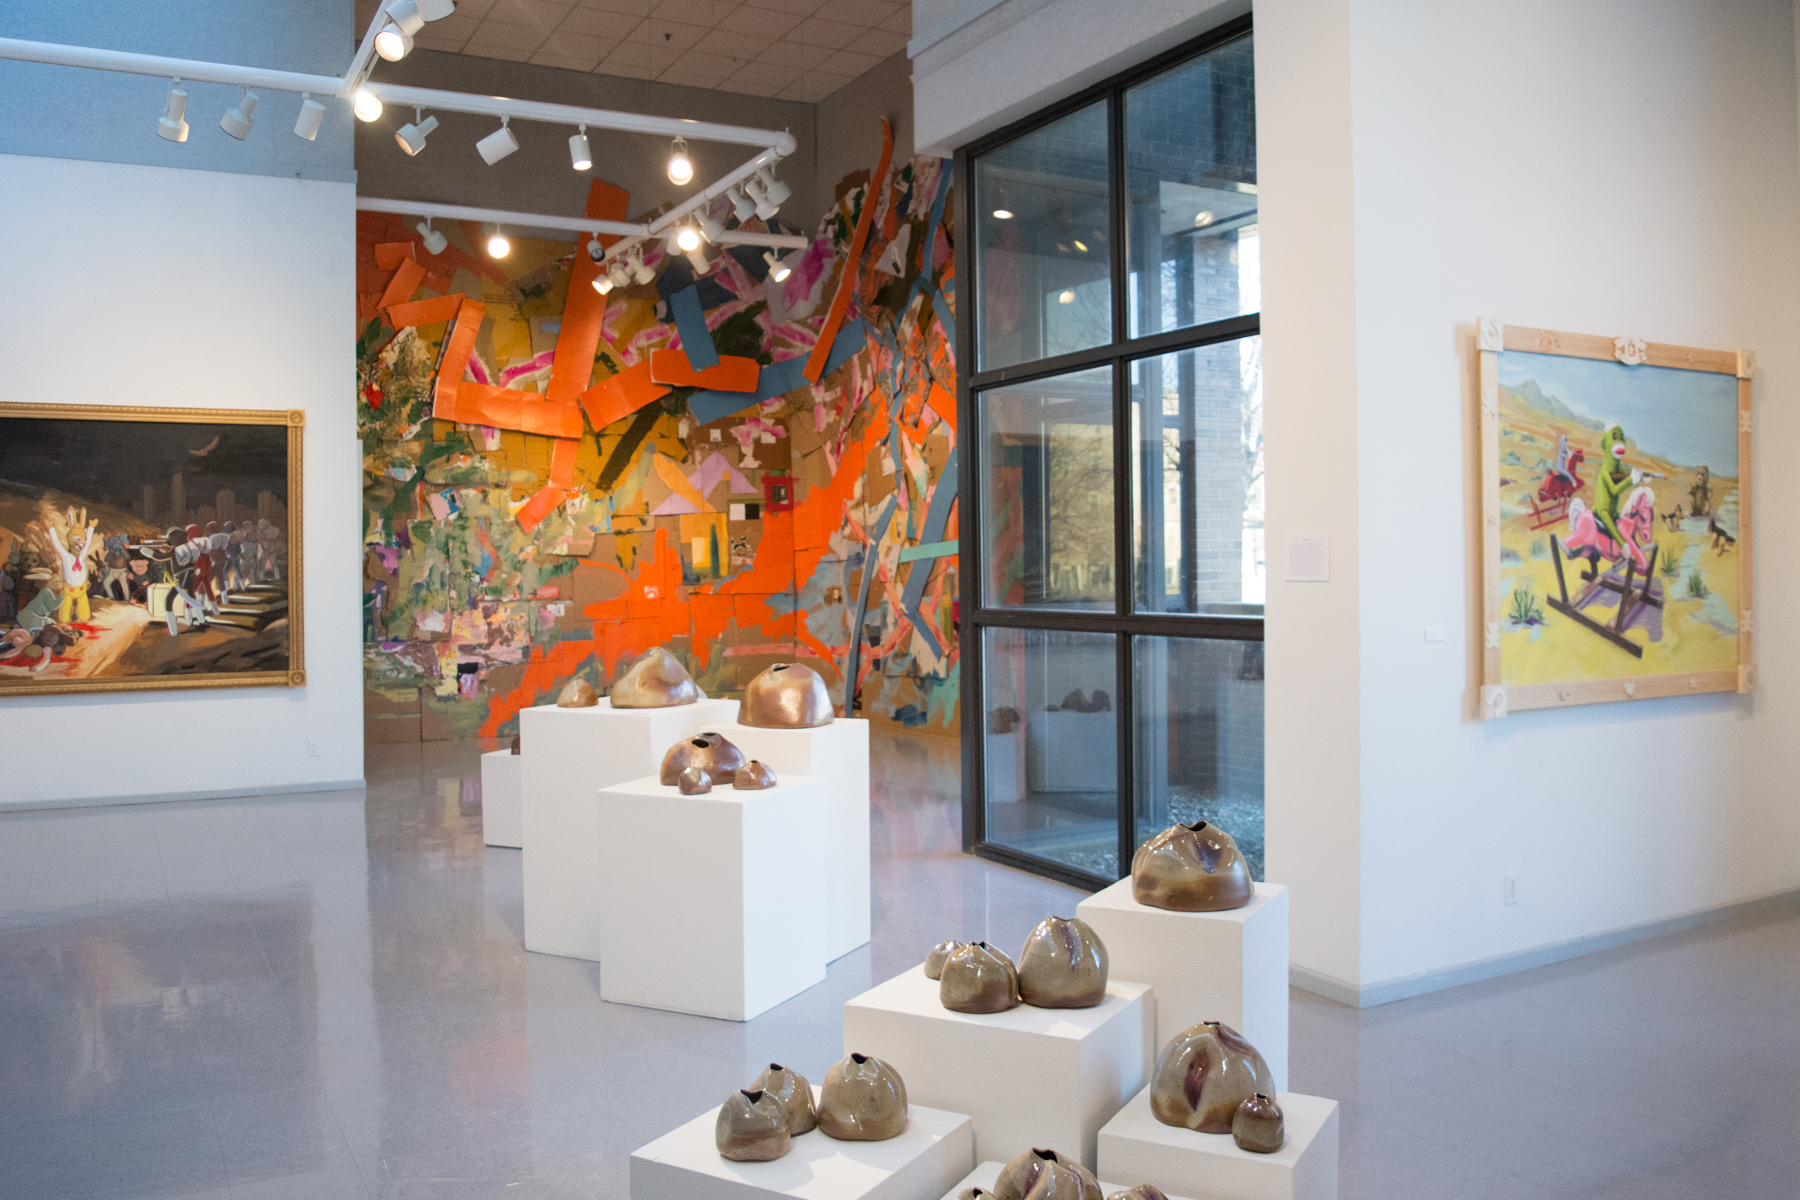 Installation shot of the MA Exhibition in Heuser Art Center at Bradley University. Ceramic pieces by Natalie Zelman are in the foreground. Framed oil paintings on the walls to the left and right by Jack Crouch. A large mixed-media painting installation hangs on the wall in the background. 